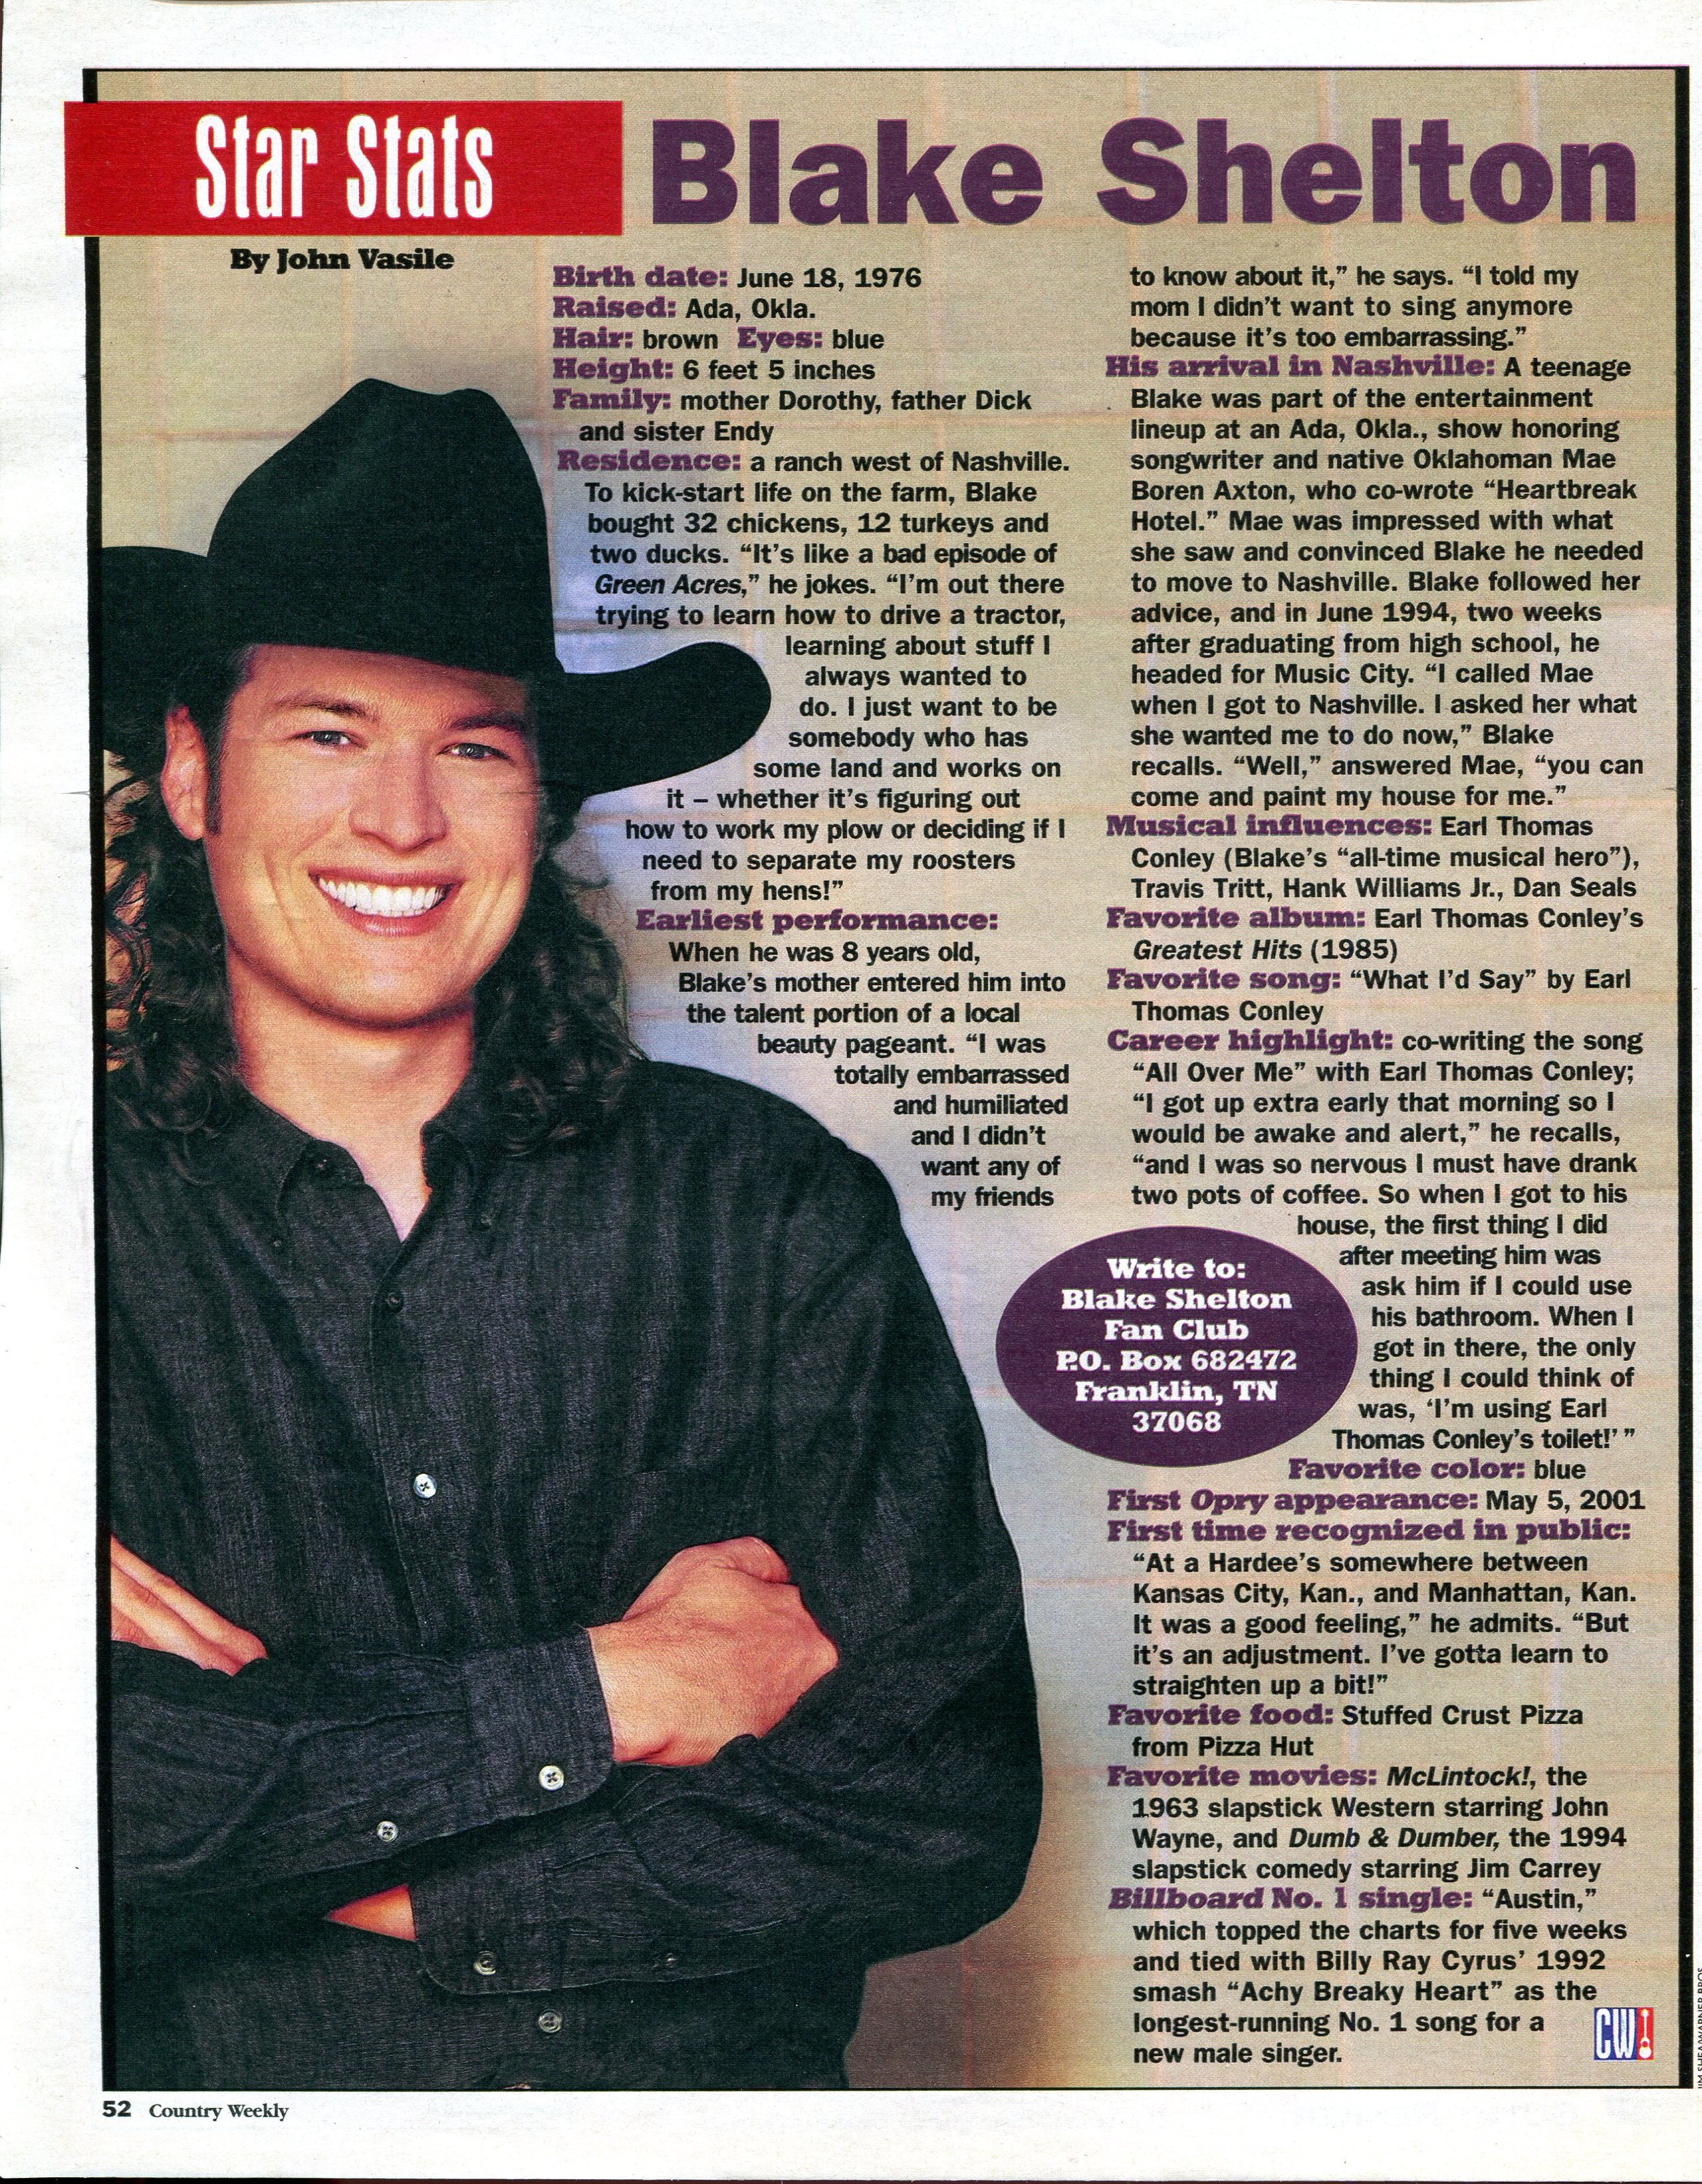 Country Weekly - Sept. 17th 2002